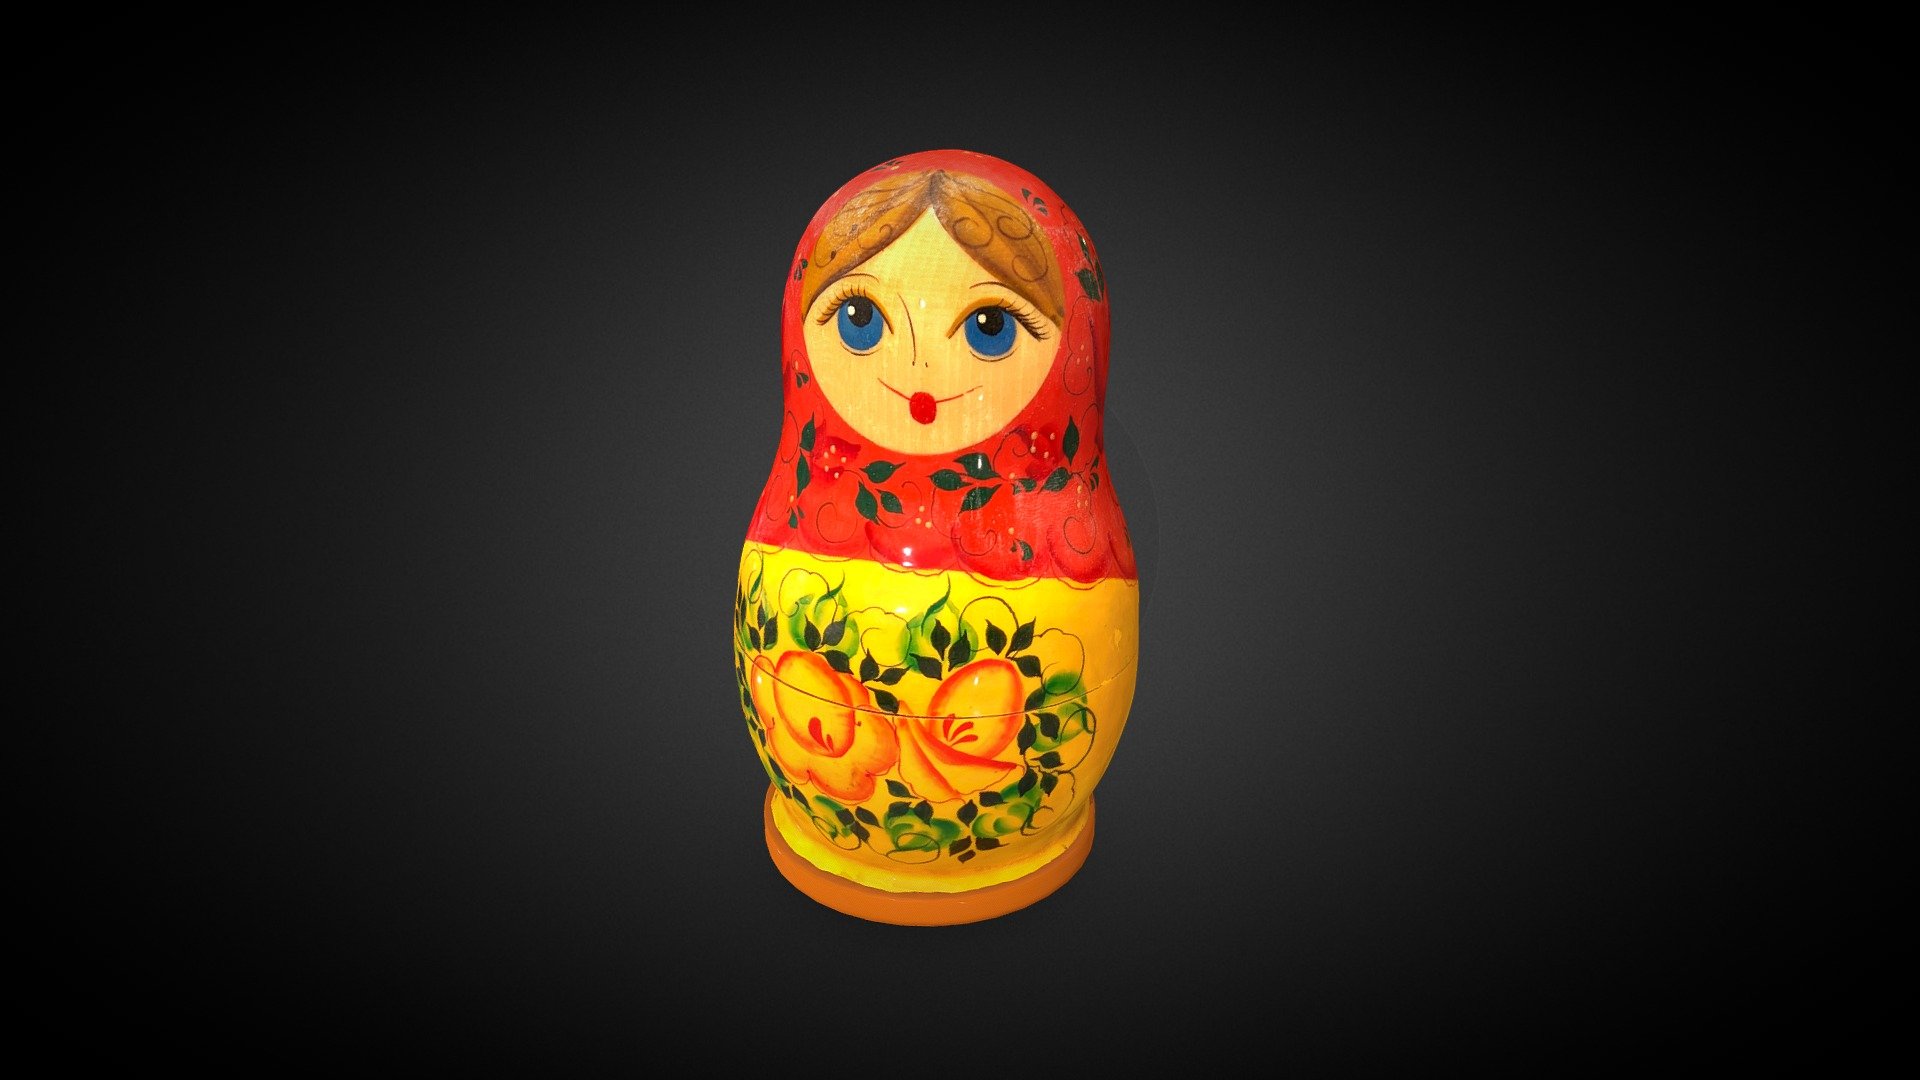 The Matryoshka is associated in Russia with family and fertility. Matryoshka dolls are a traditional representation of the mother carrying a child within her and can be seen as a representation of a chain of mothers carrying on the family legacy through the child in their womb.
Wikipedia - Matryoshka doll - Download Free 3D model by Moshe Caine (@mosheca) 3d model